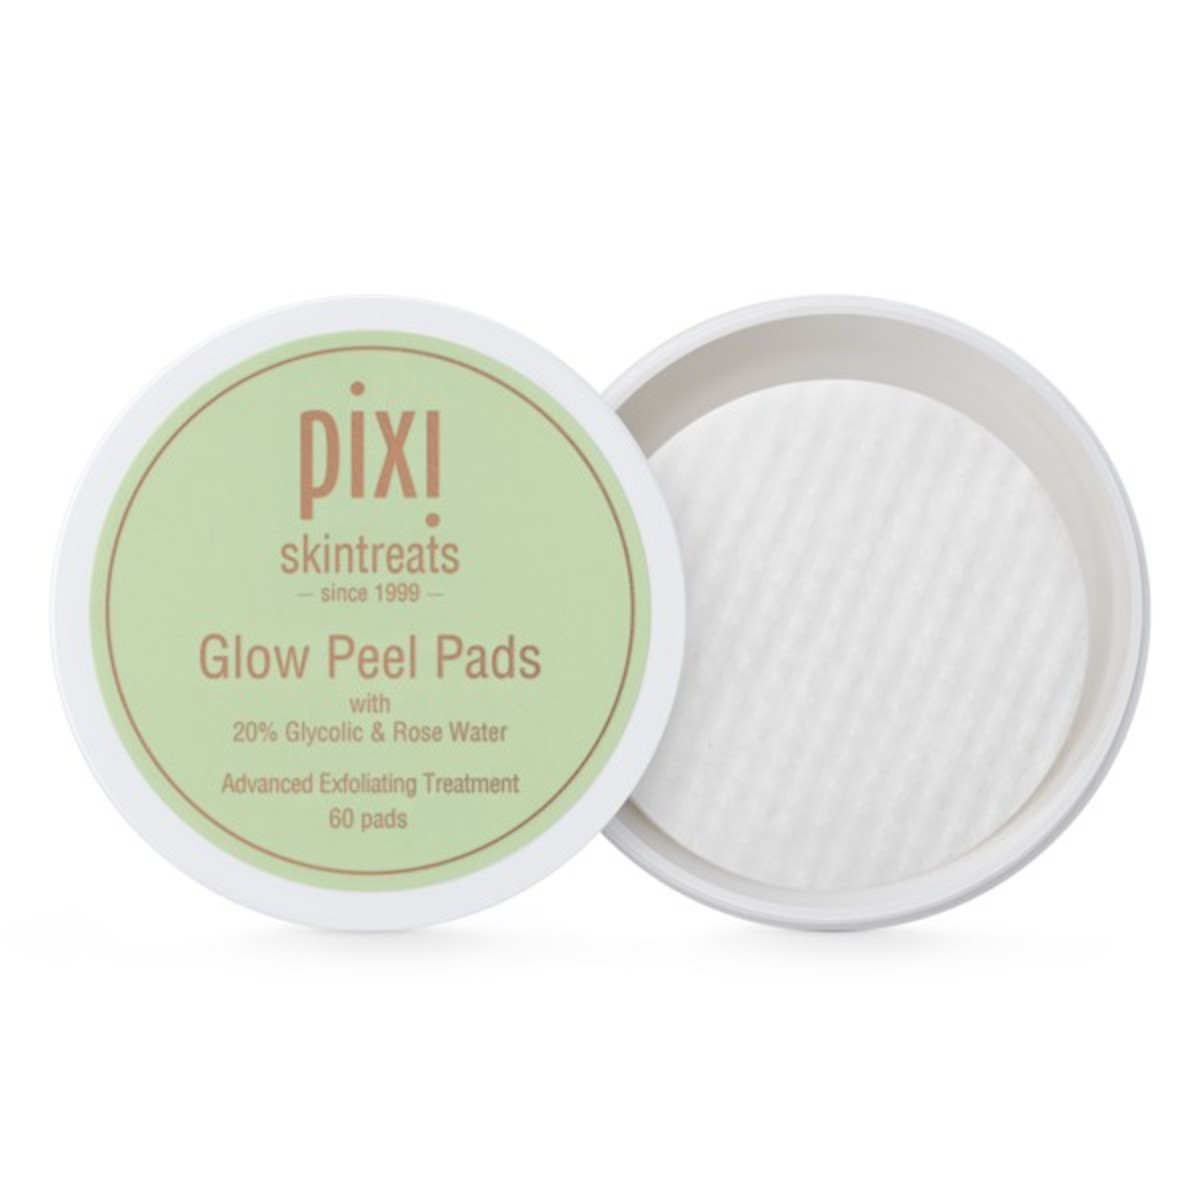 Pixi By Petra Glow Peel Pads, $22, available at Target. Photo: Courtesy of Pixi